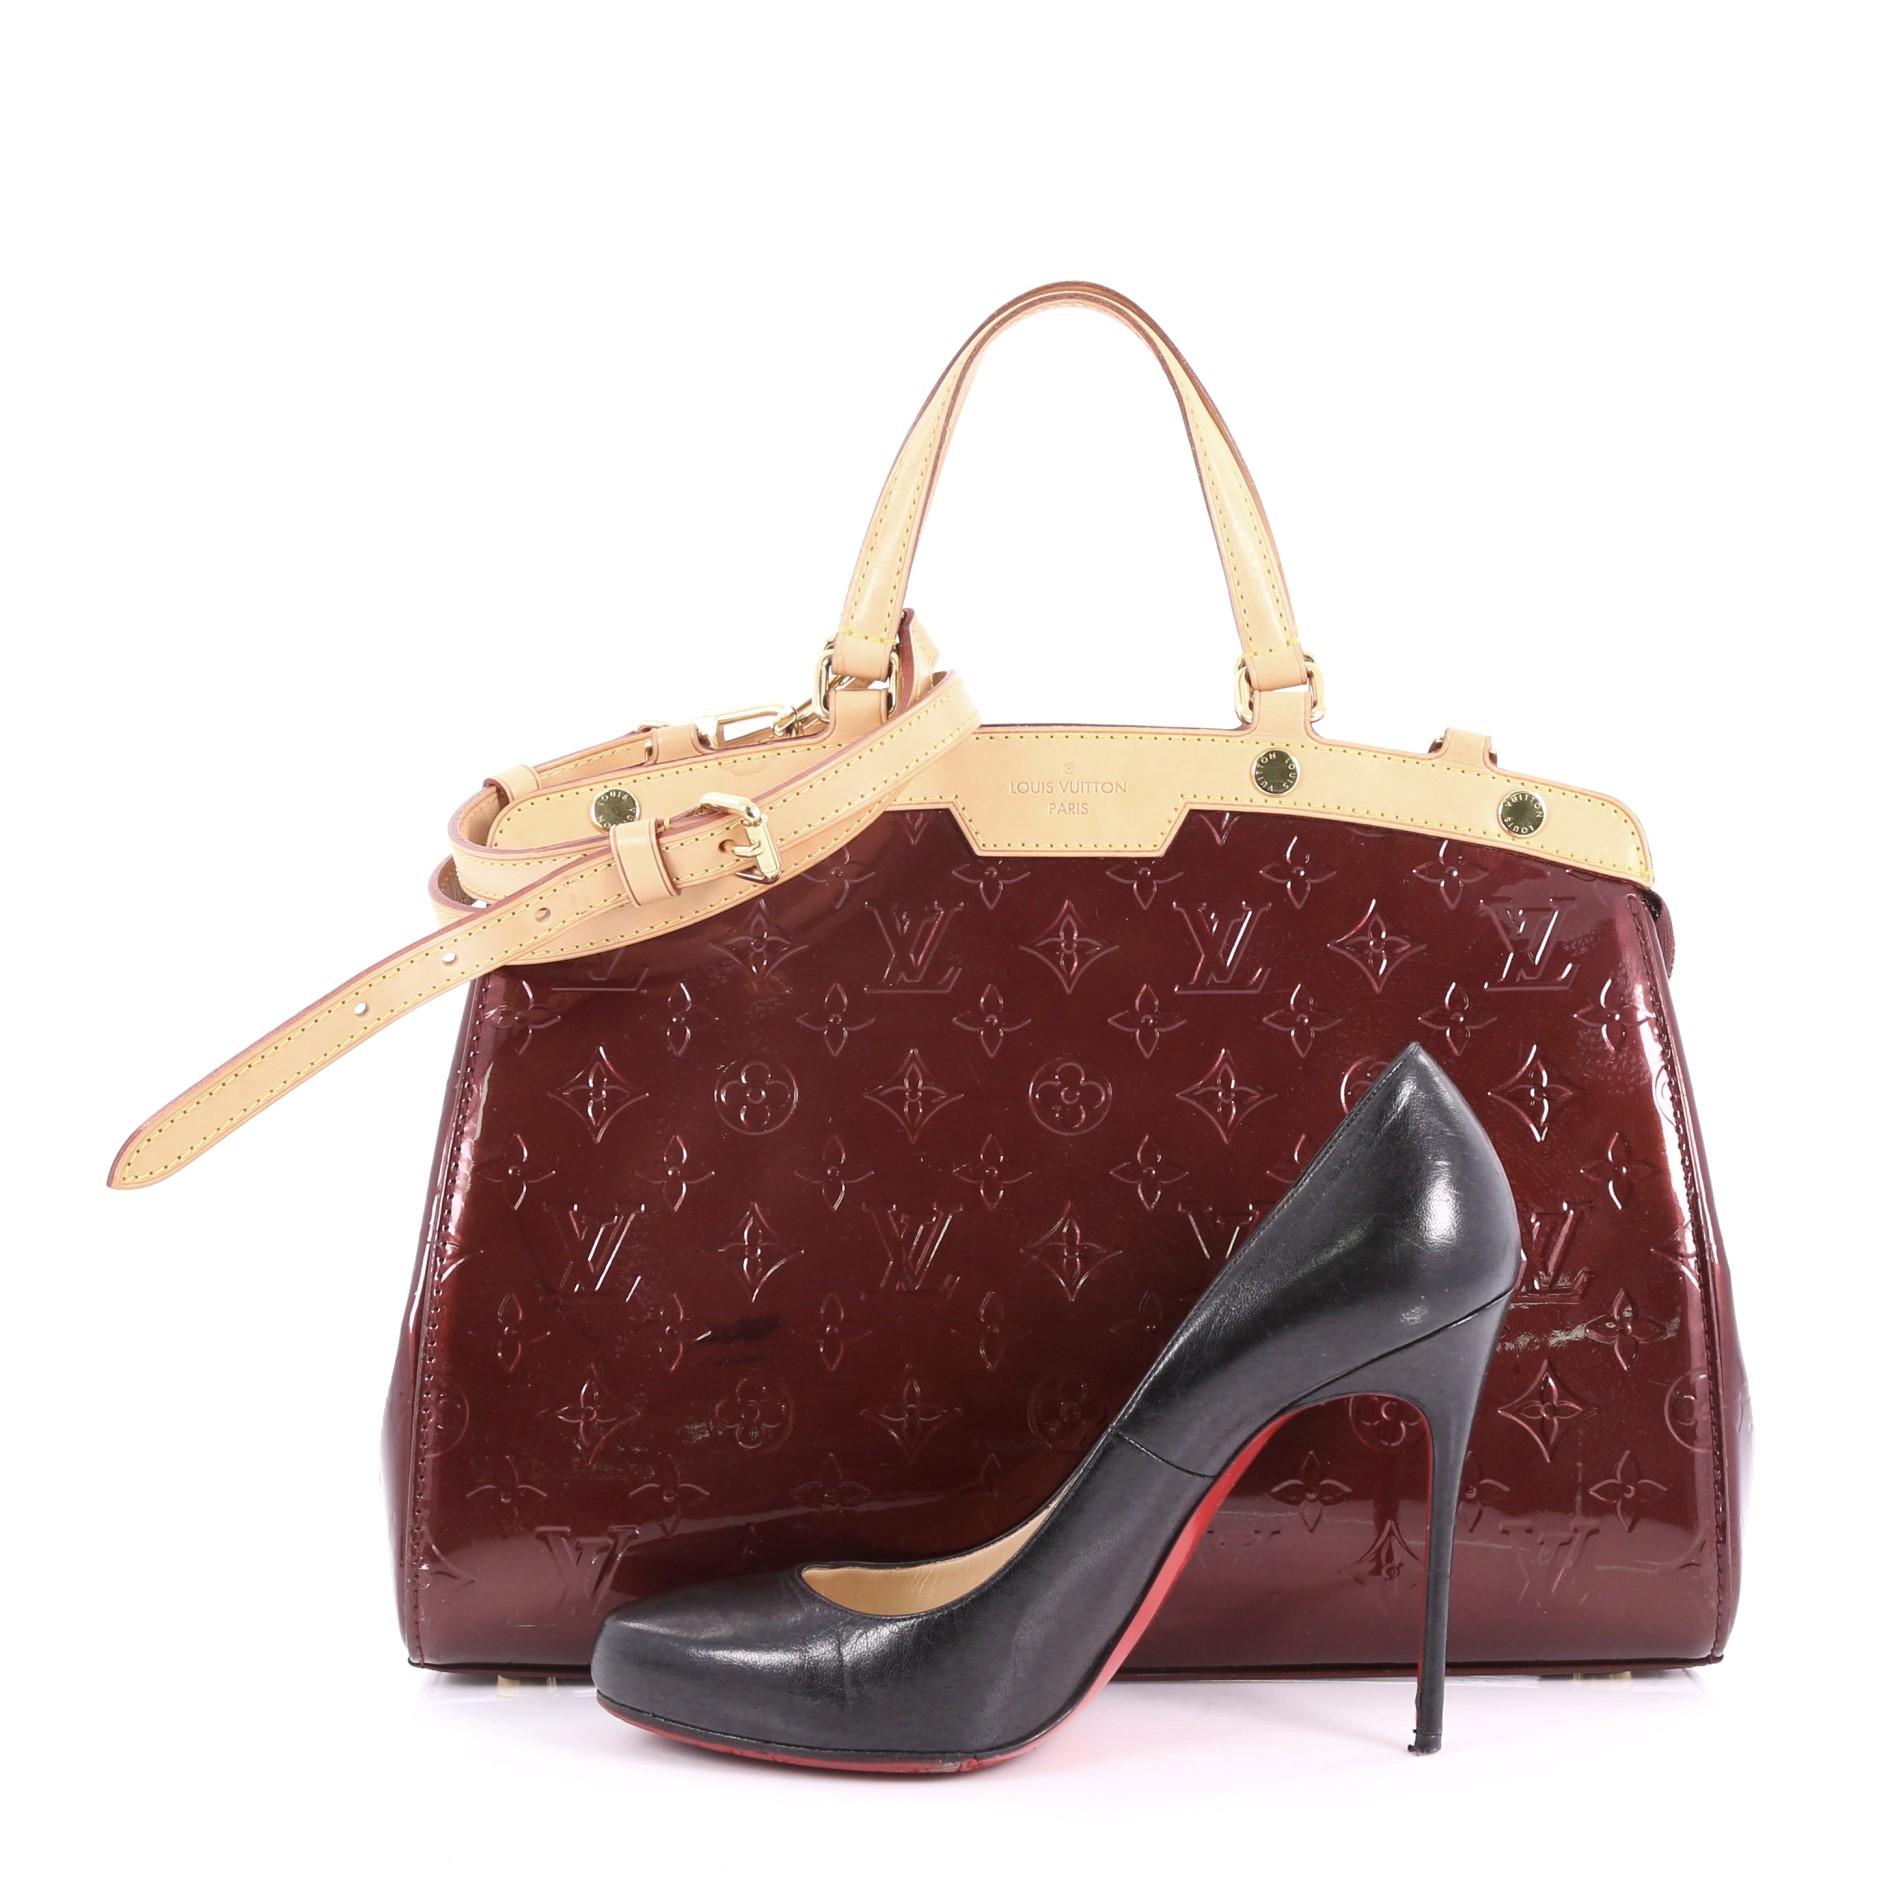 This Louis Vuitton Brea Handbag Monogram Vernis MM, crafted in dark red monogram vernis leather, features dual flat handles, cowhide leather trims, and gold-tone hardware accents. Its zip closure opens to a dark red fabric interior with zip and slip